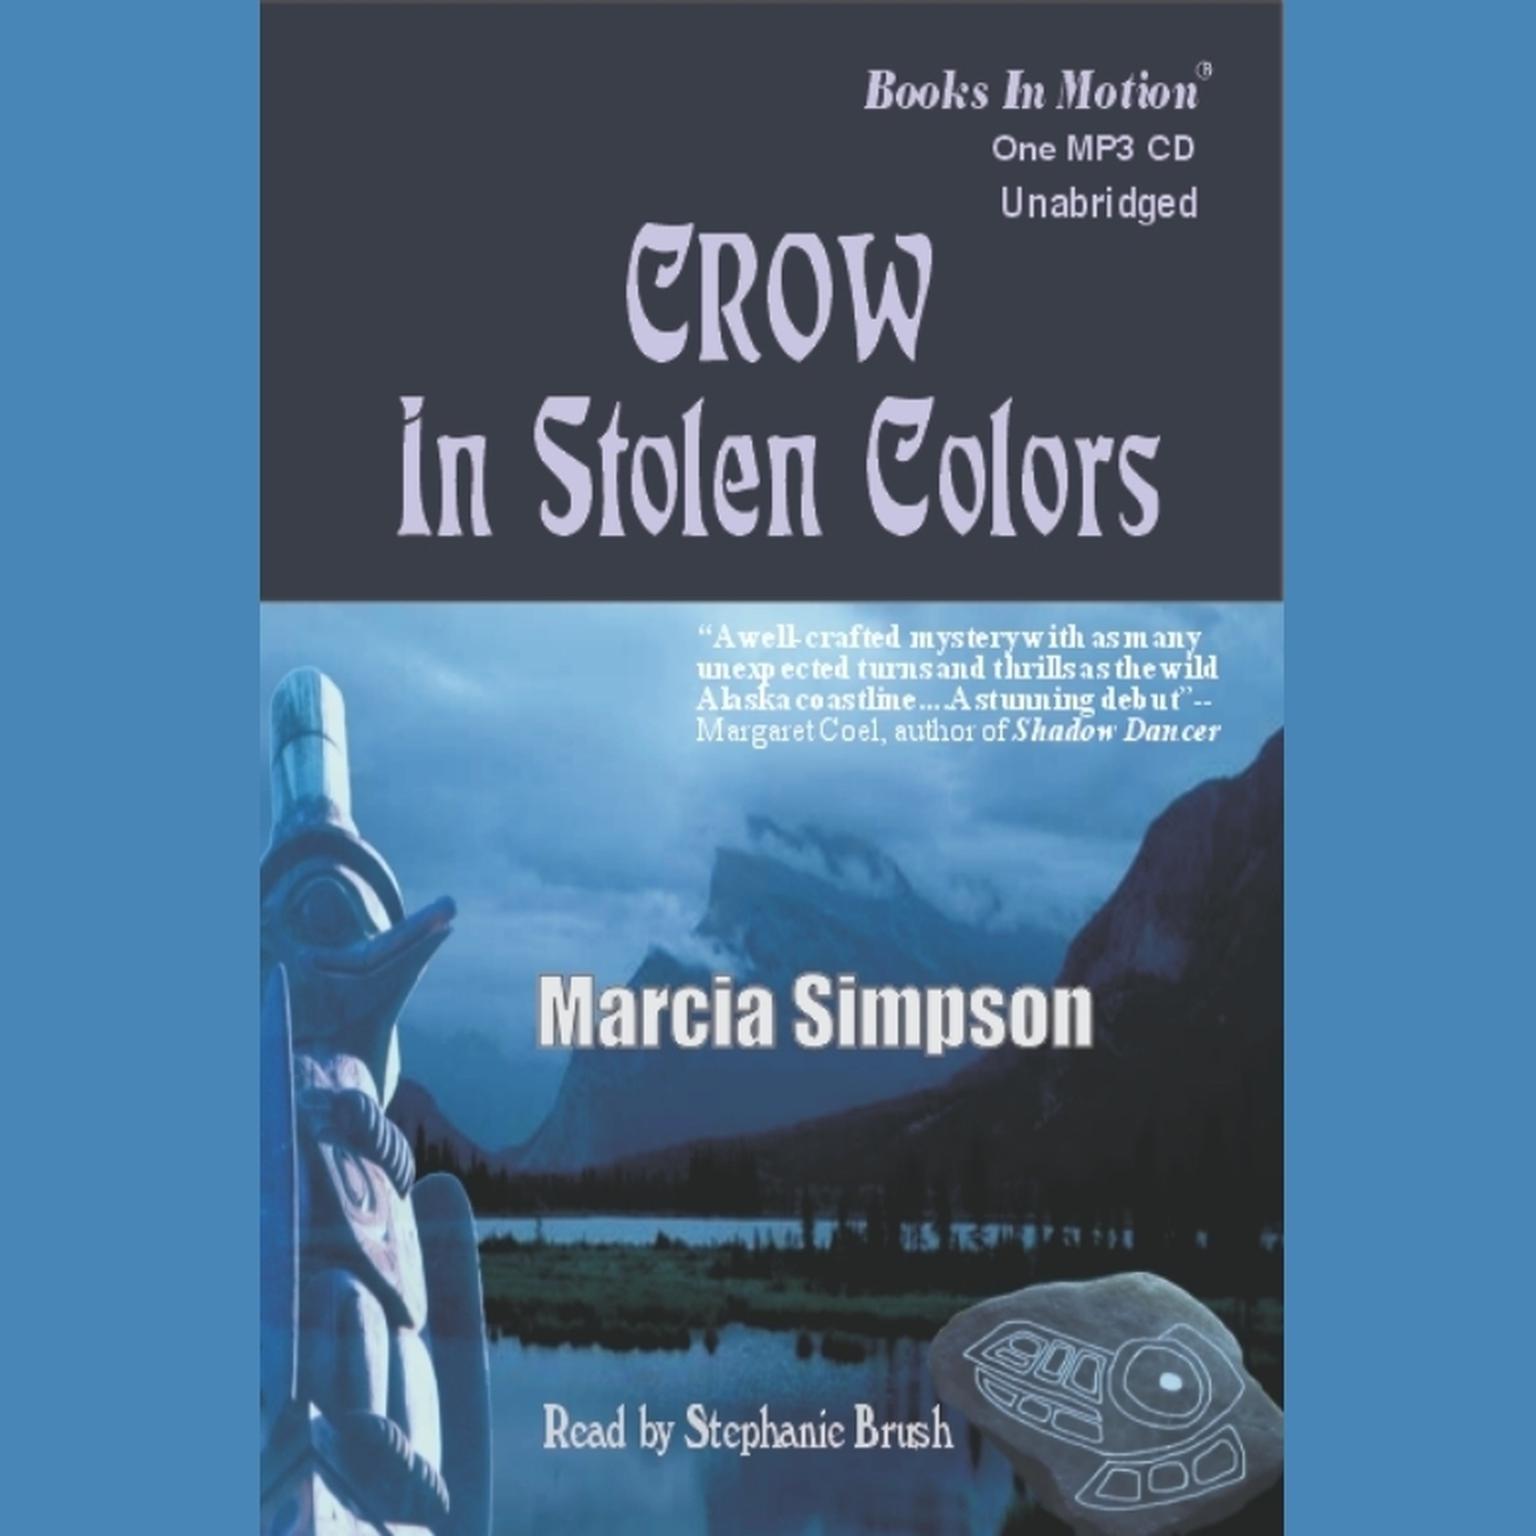 Crow in Stolen Colors Audiobook, by Marcia Simpson